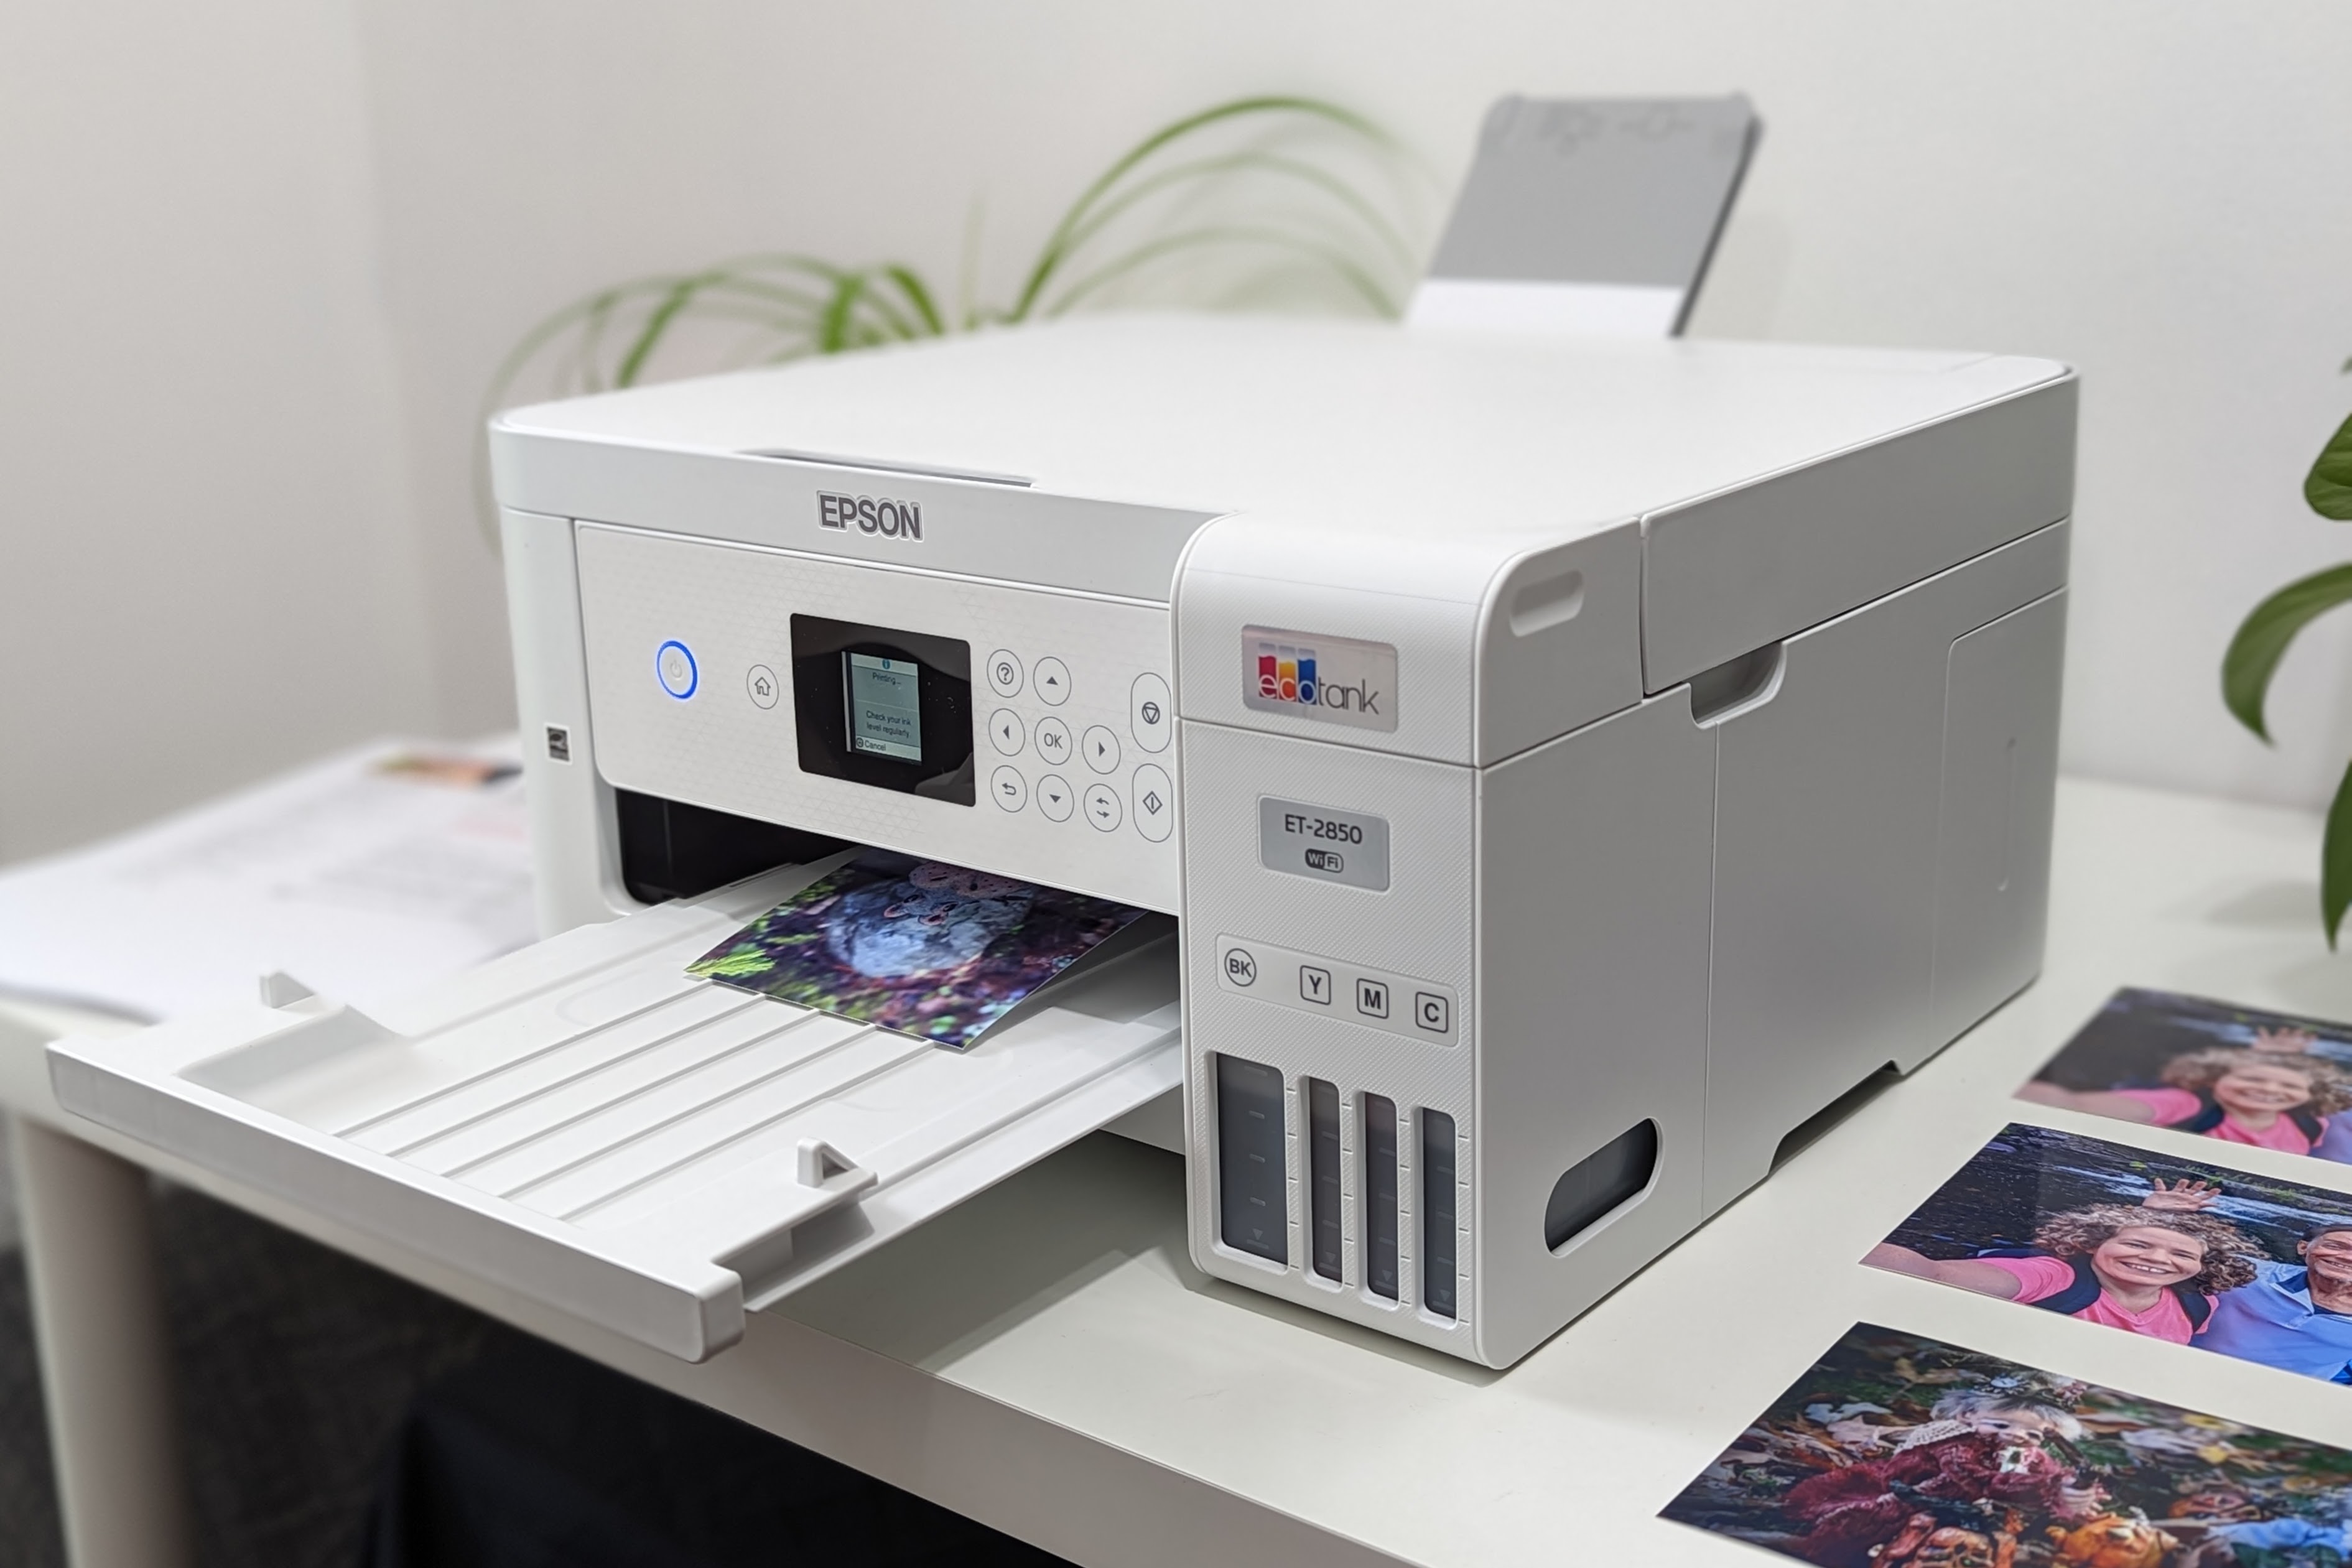 Digital cartridges but no years ET-2850 Trends ink review: | Epson EcoTank of